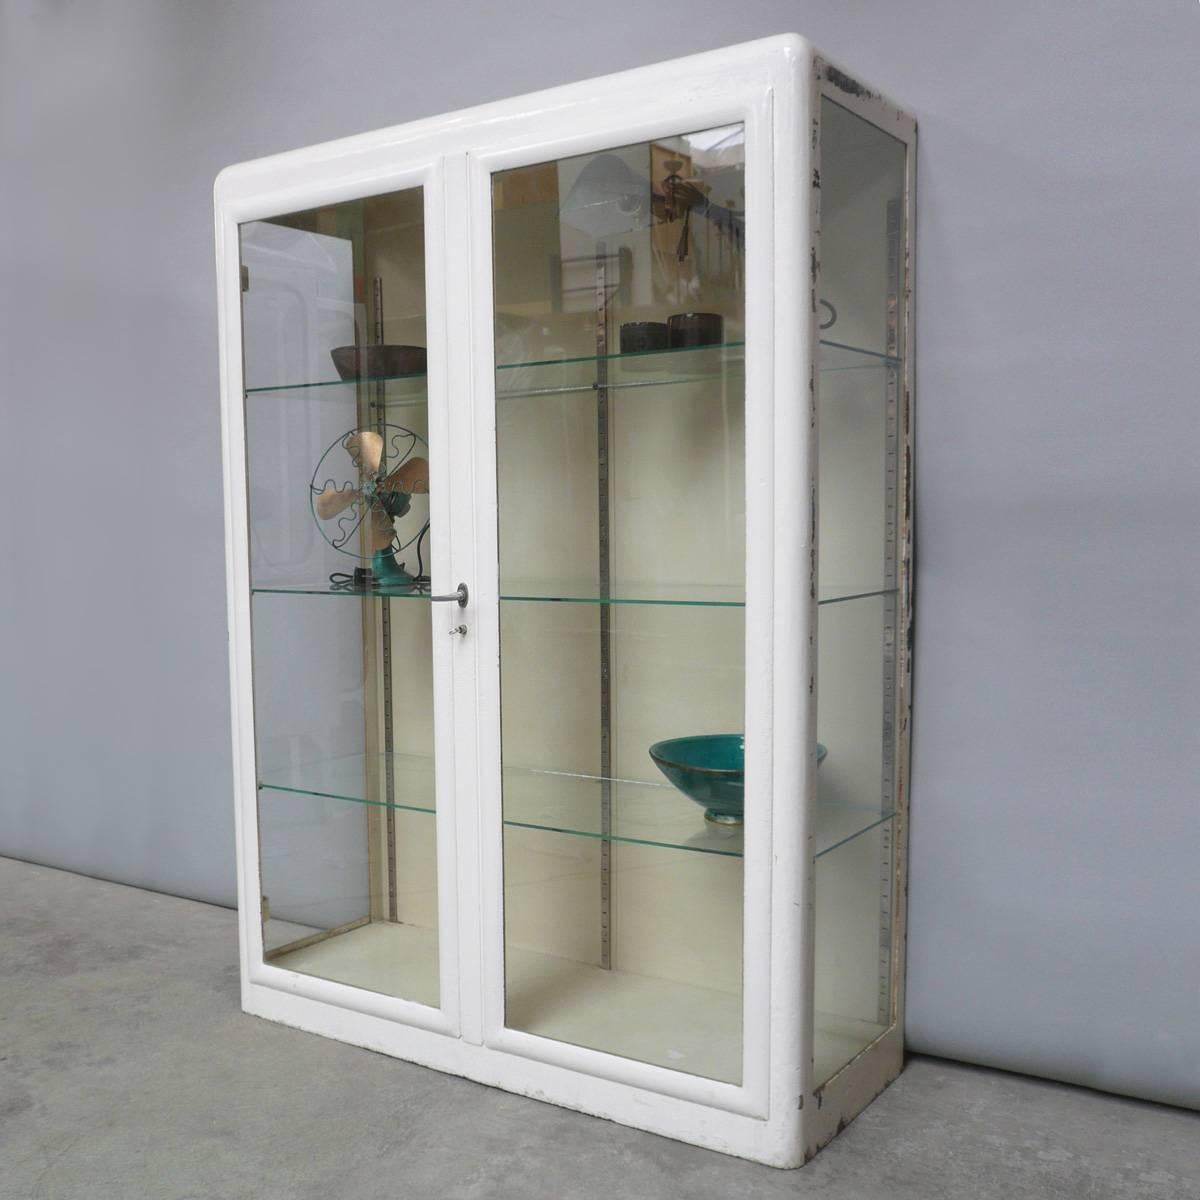 This vintage cabinet was produced in Hungary during the 1930s. The cabinet is made of steel with three glass shelves. The unit features two opening doors that lock with a key. The 150kg cabinet has a height of 170 cm and length of 123 cm. The item